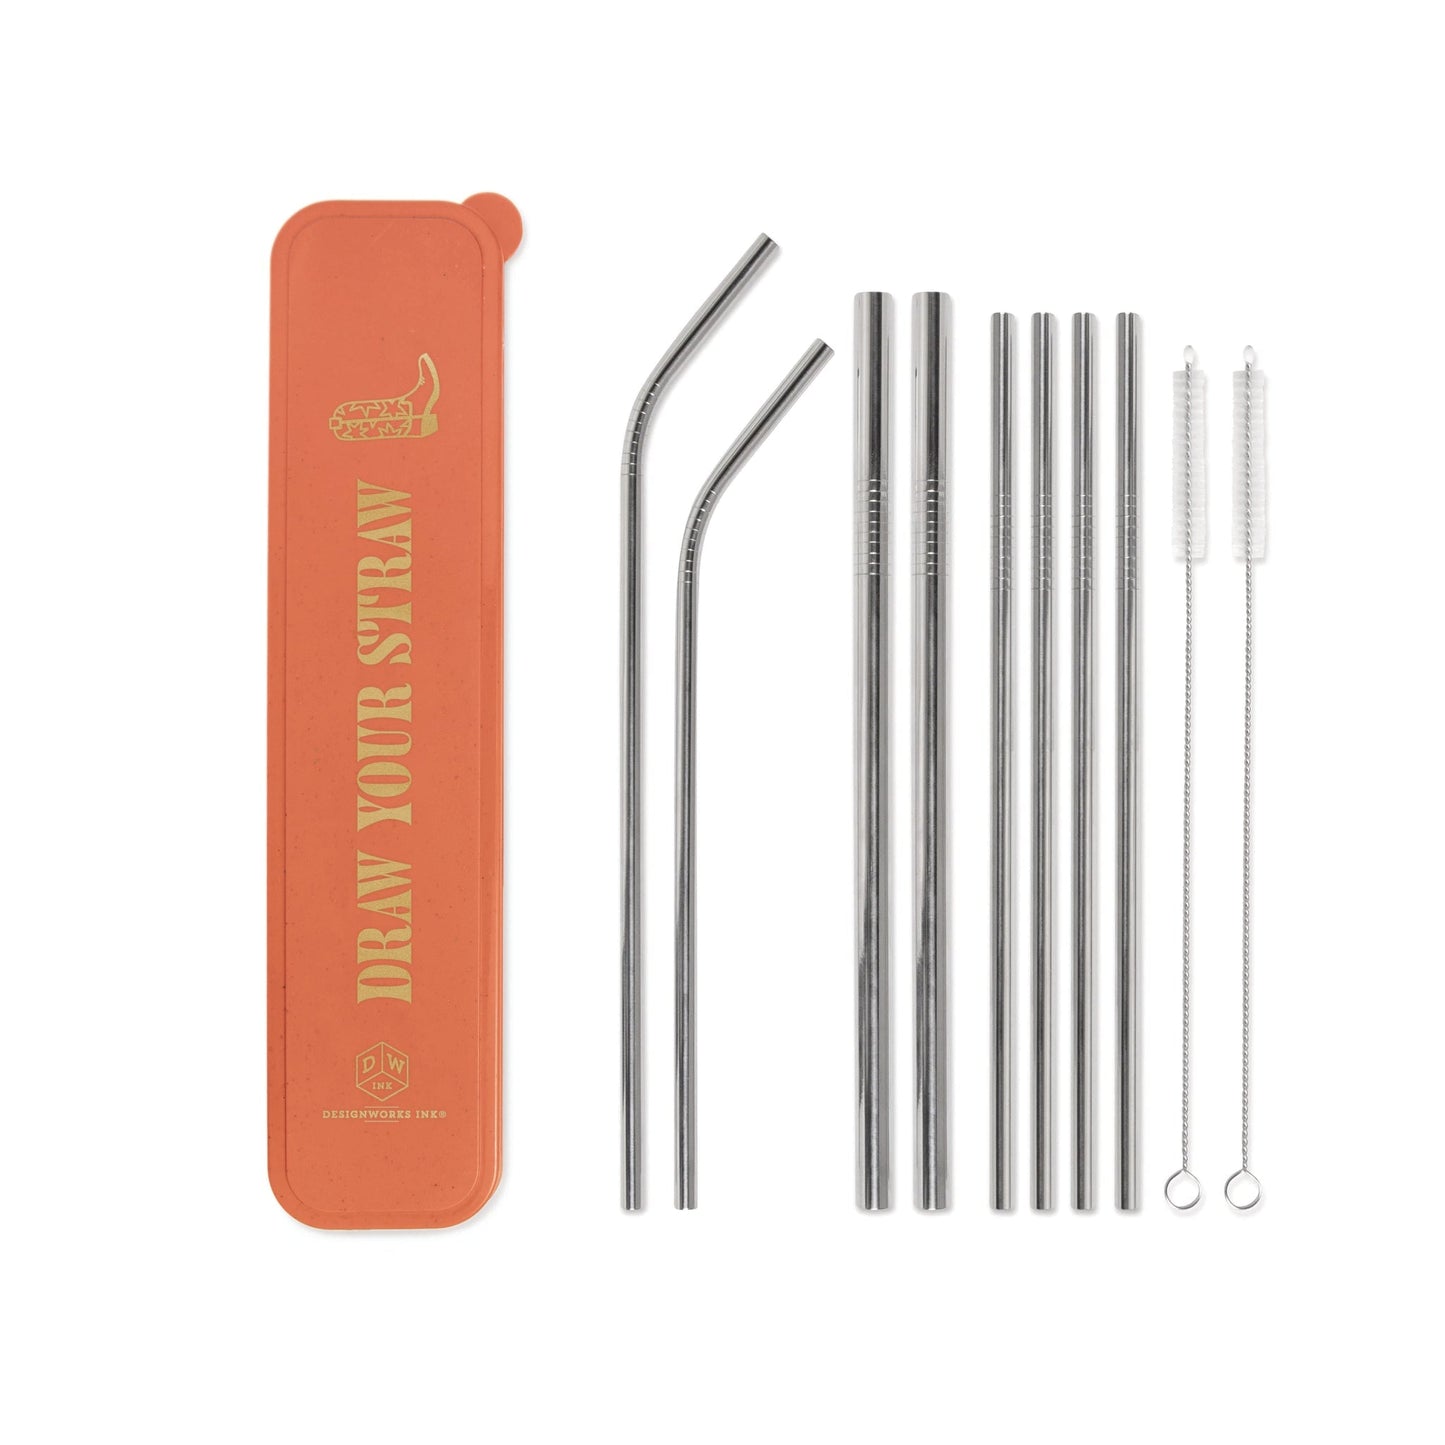 stainless steel straw set with eight straws of varying design with two brushes and an orange case with boot and text embossed in gold; text reads "Draw Your Straw"